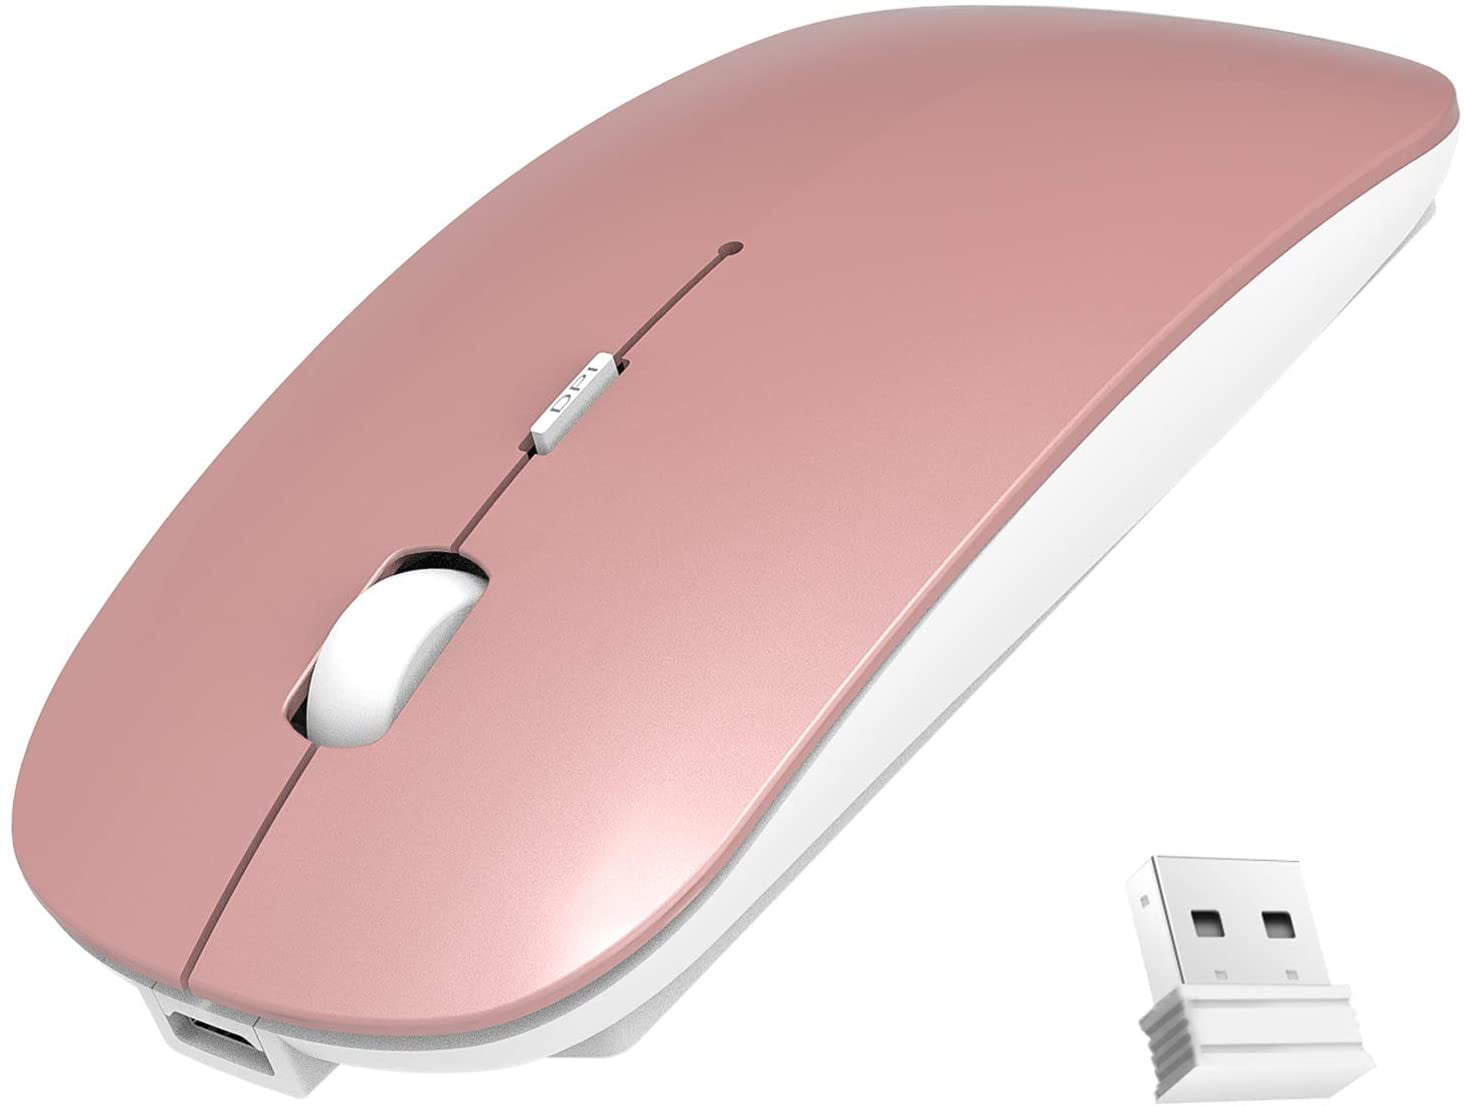 2.4G Wireless Portable Mobile Mouse Wireless Rechargeable Mouse Cordless Mouse Optical Mice with USB Receiver for Laptop Rose Gold Windows Computer Mac OS Android MacBook Linux 